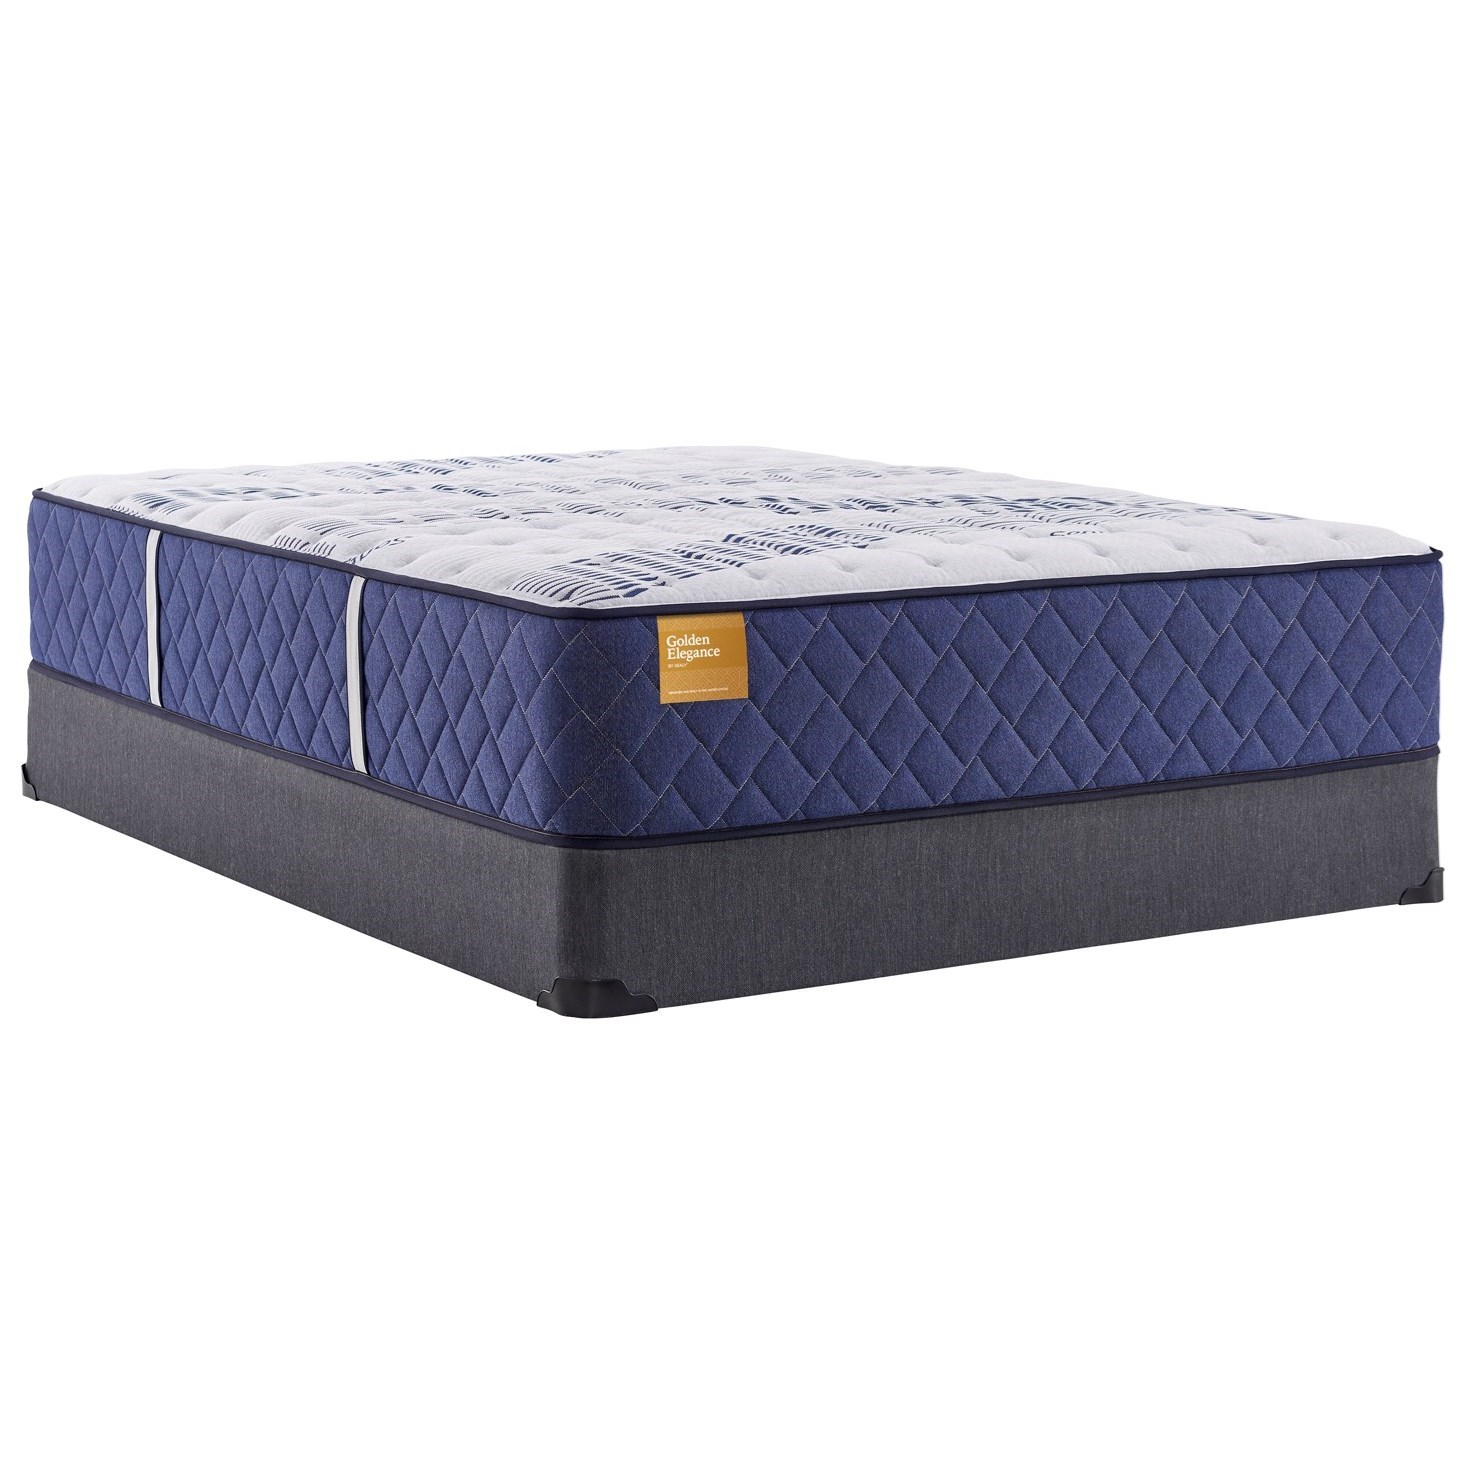 Cal King 14 1/2" Plush Encased Coil Mattress and 9" High Profile Foundation